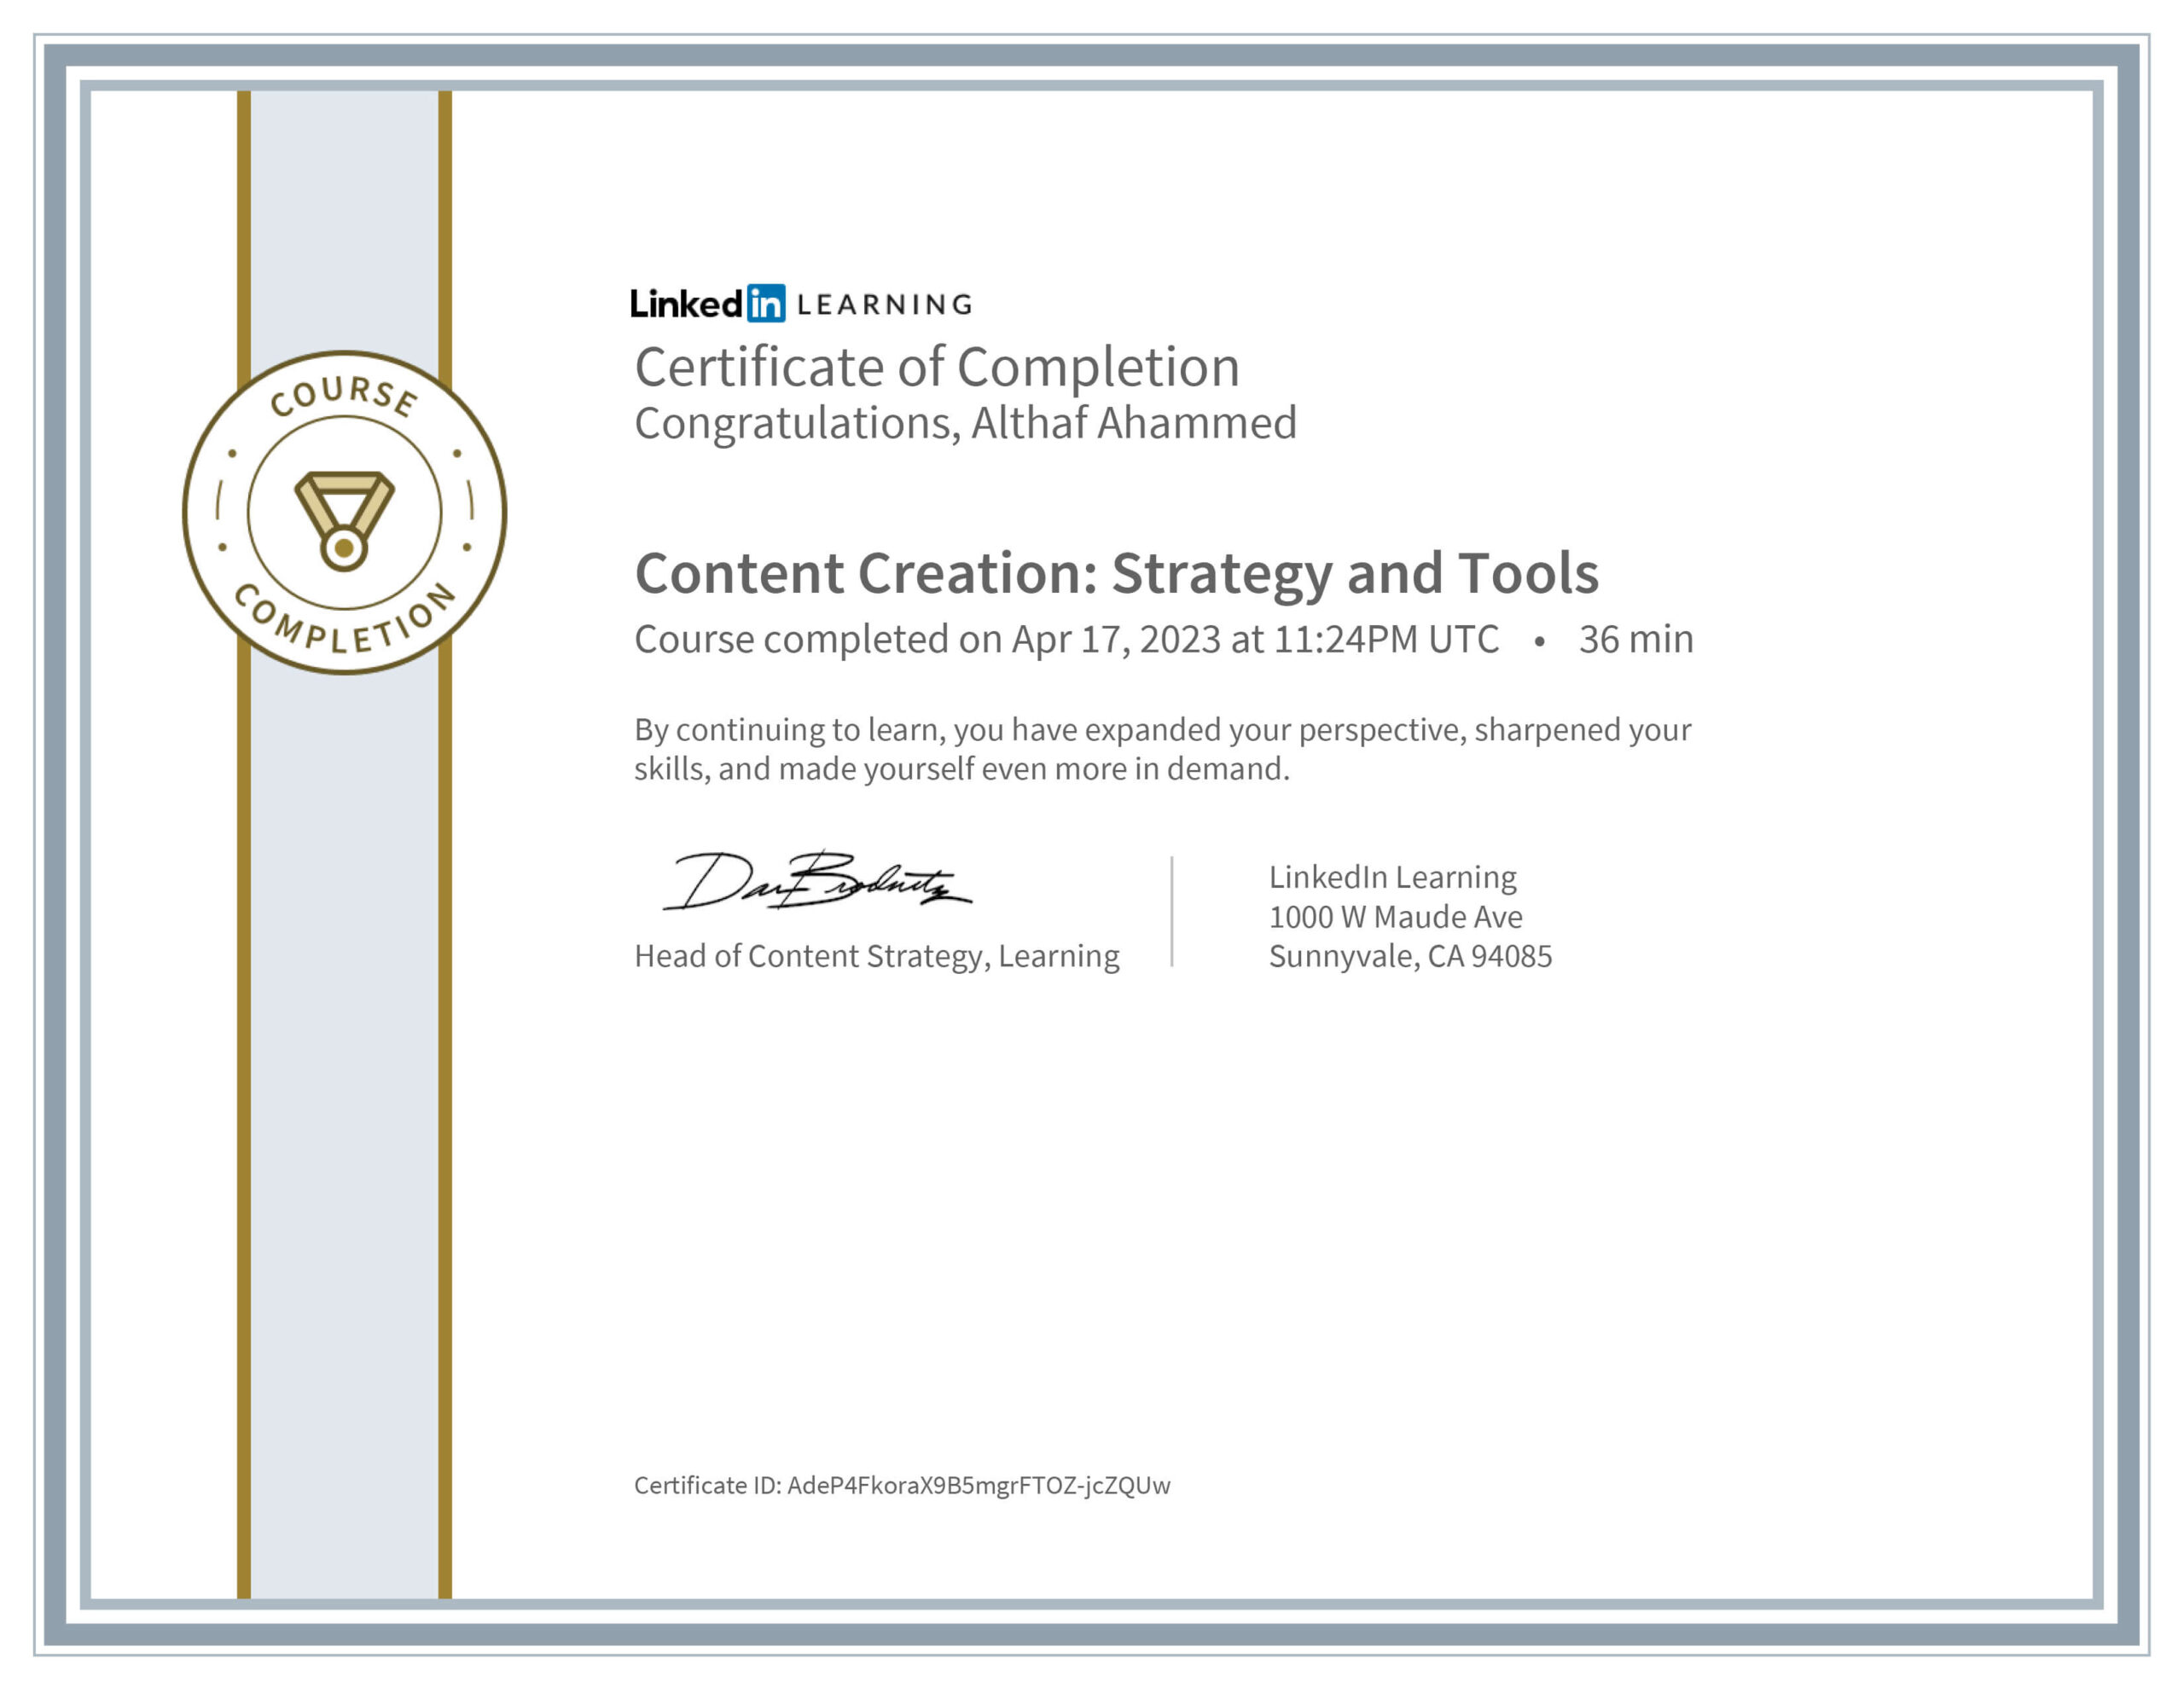 LinkedIn Learning Certificate Content Creation Strategy and Tools